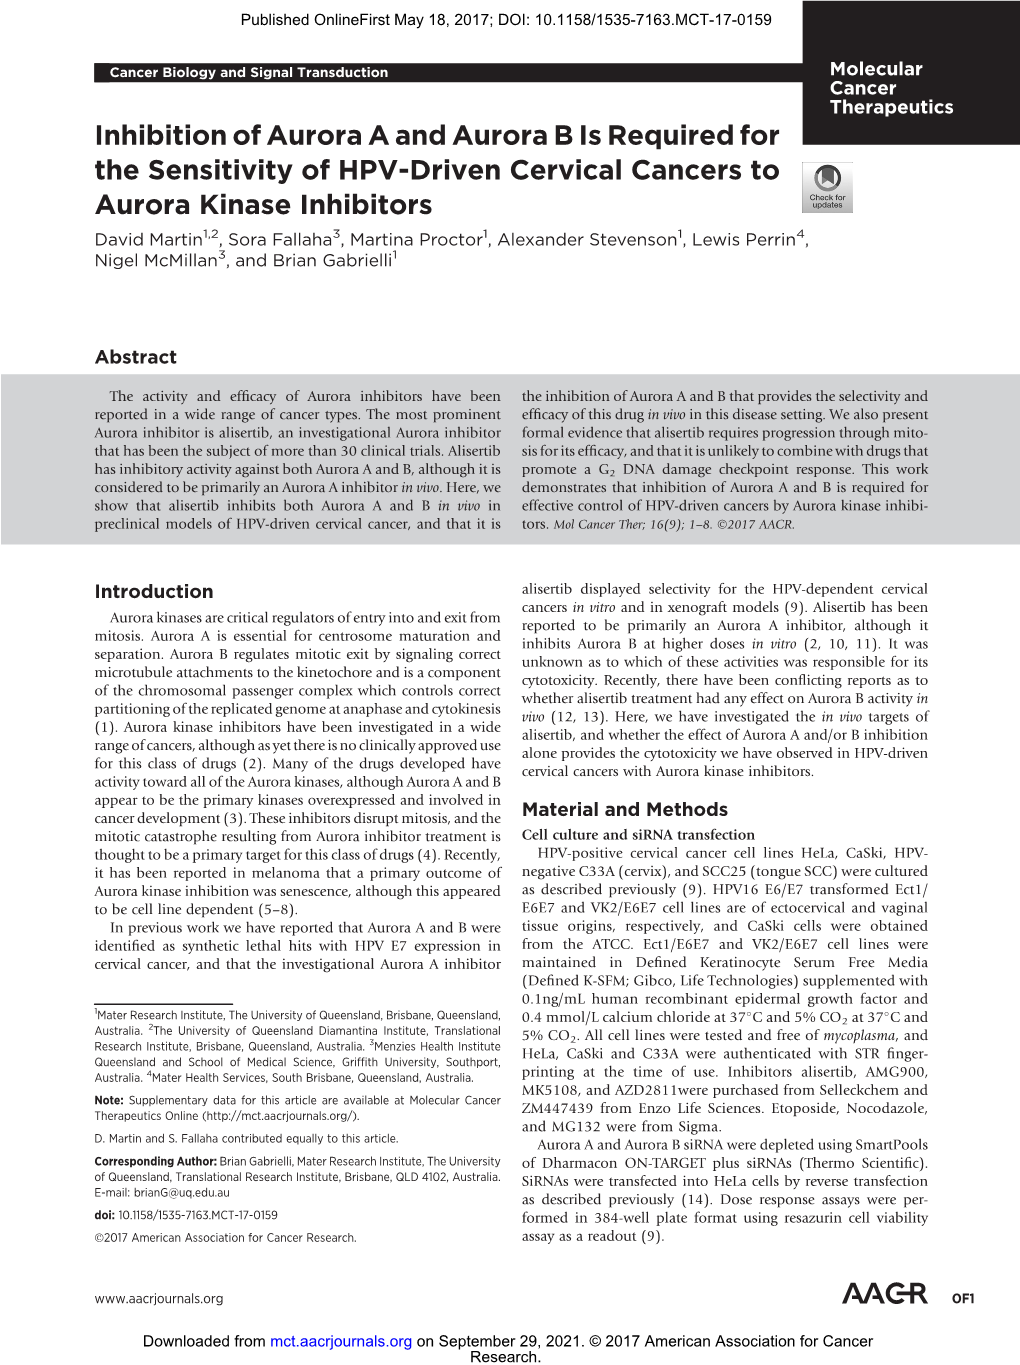 Inhibition of Aurora a and Aurora B Is Required for the Sensitivity of HPV